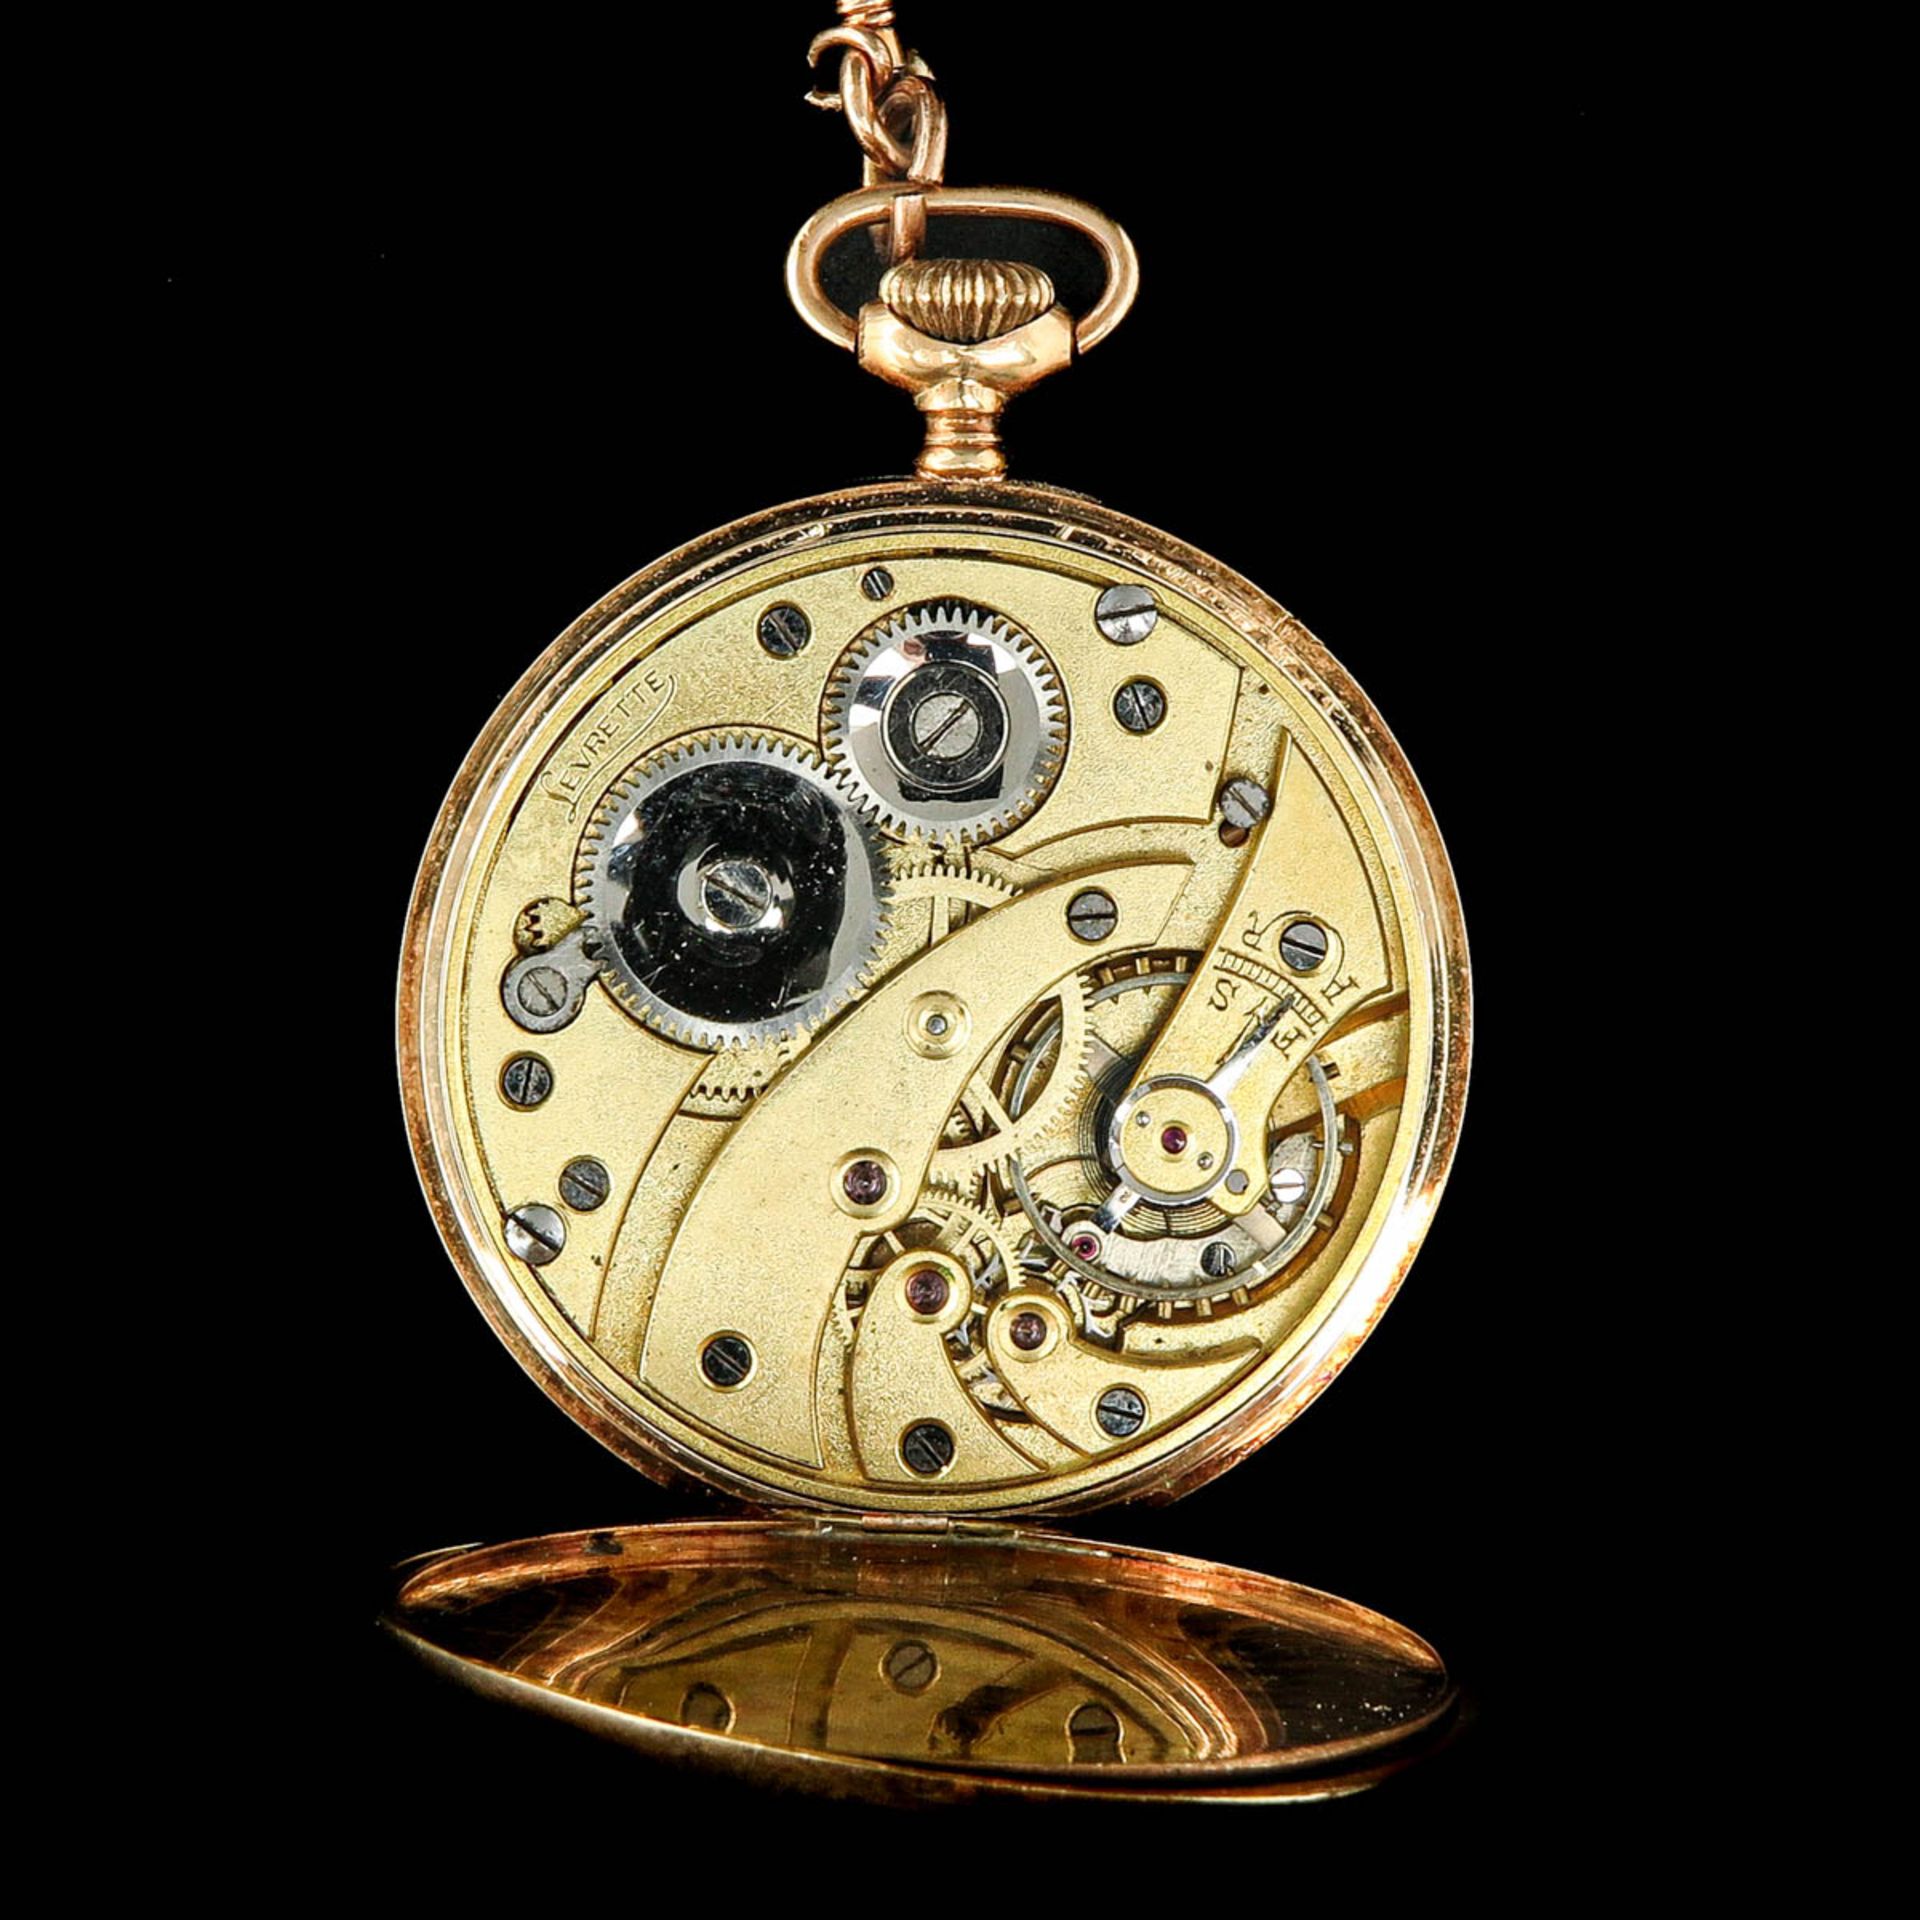 A Pocket Watch Holder with Pocket Watch - Image 6 of 7